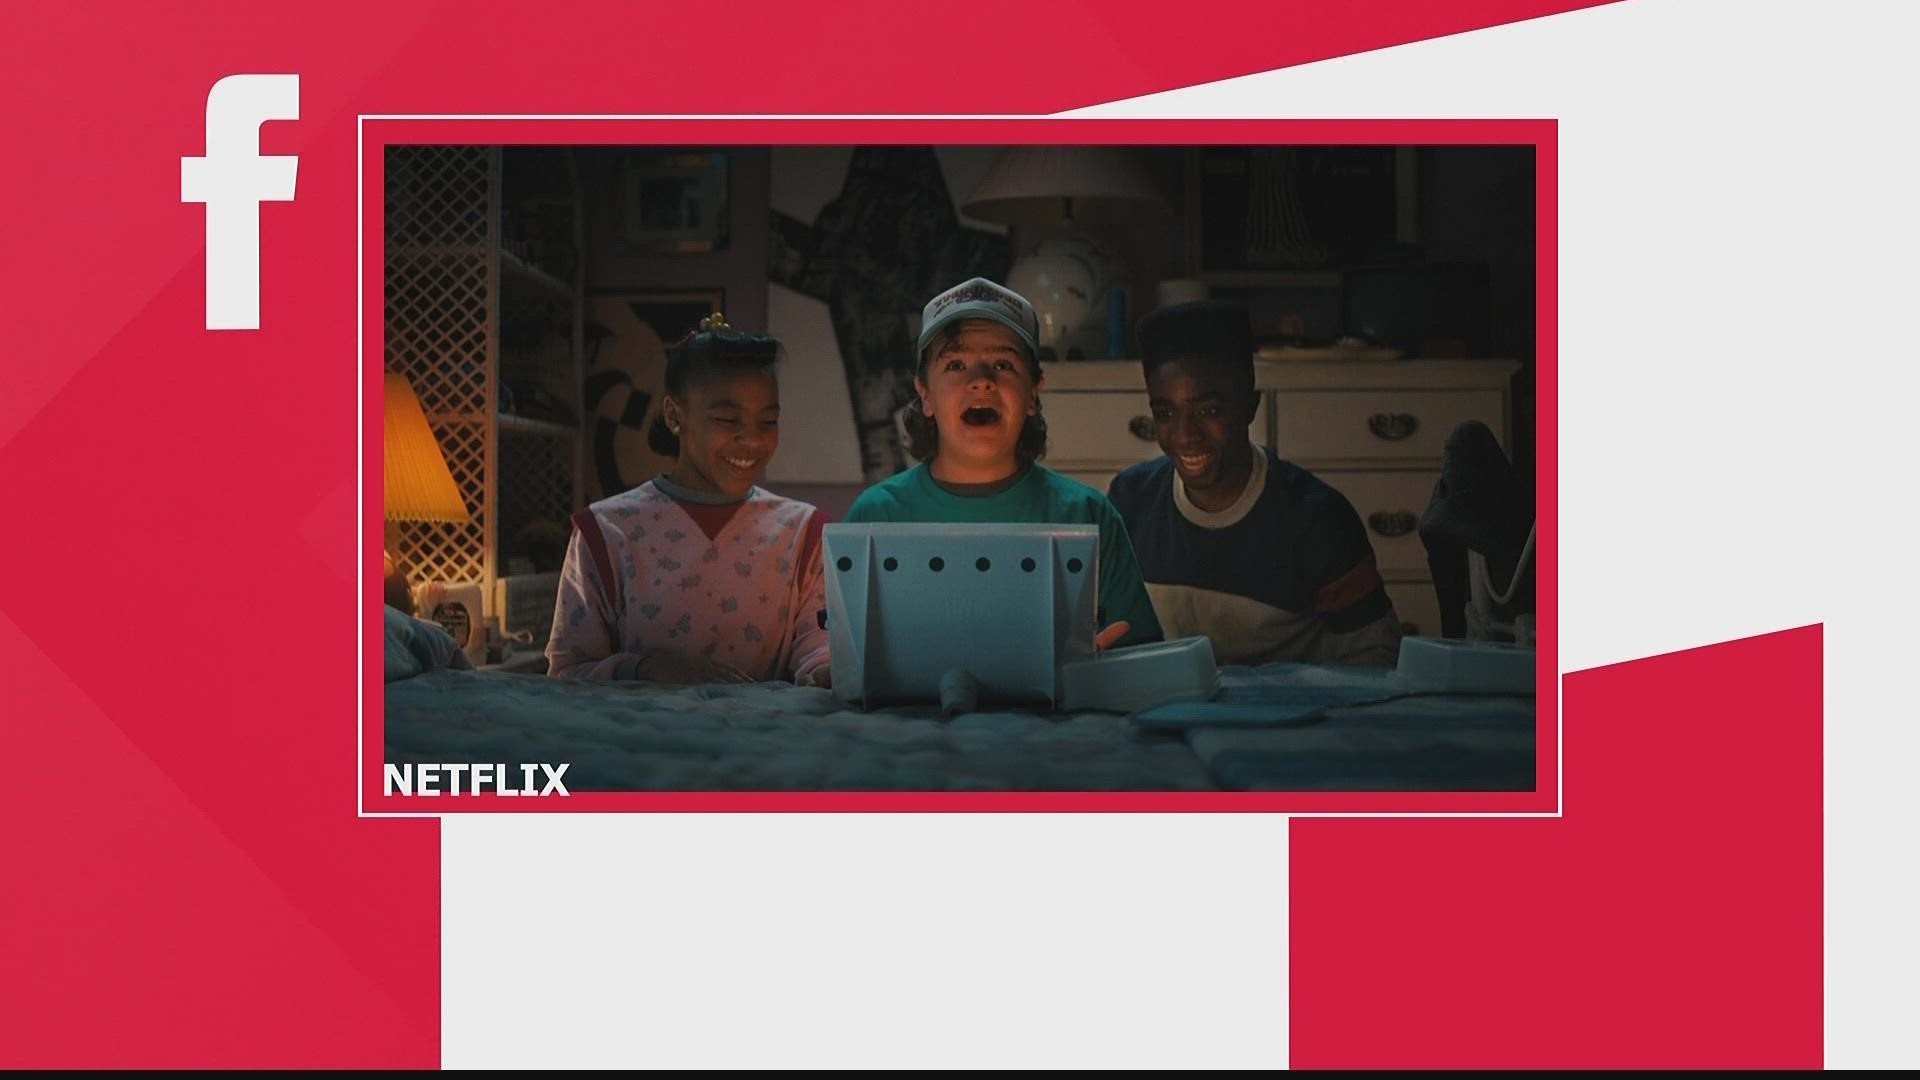 Netflix shared these pictures giving some hints.